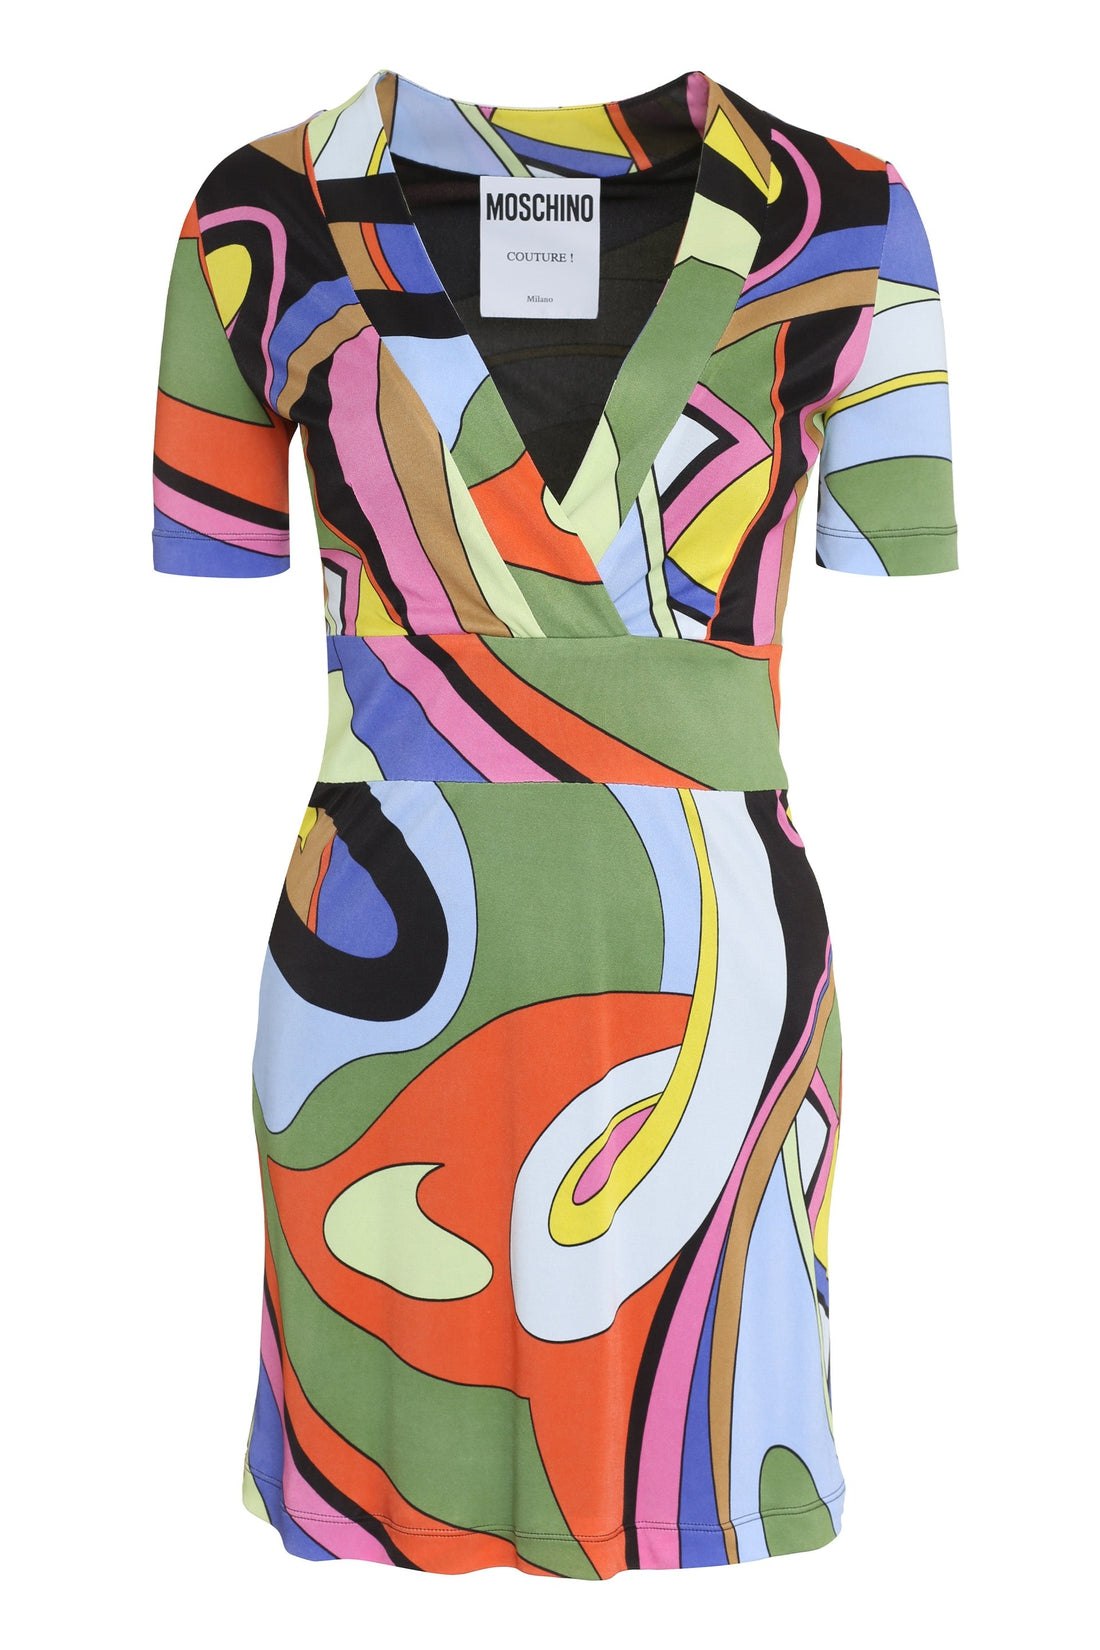 Moschino-OUTLET-SALE-Printed mini dress-ARCHIVIST